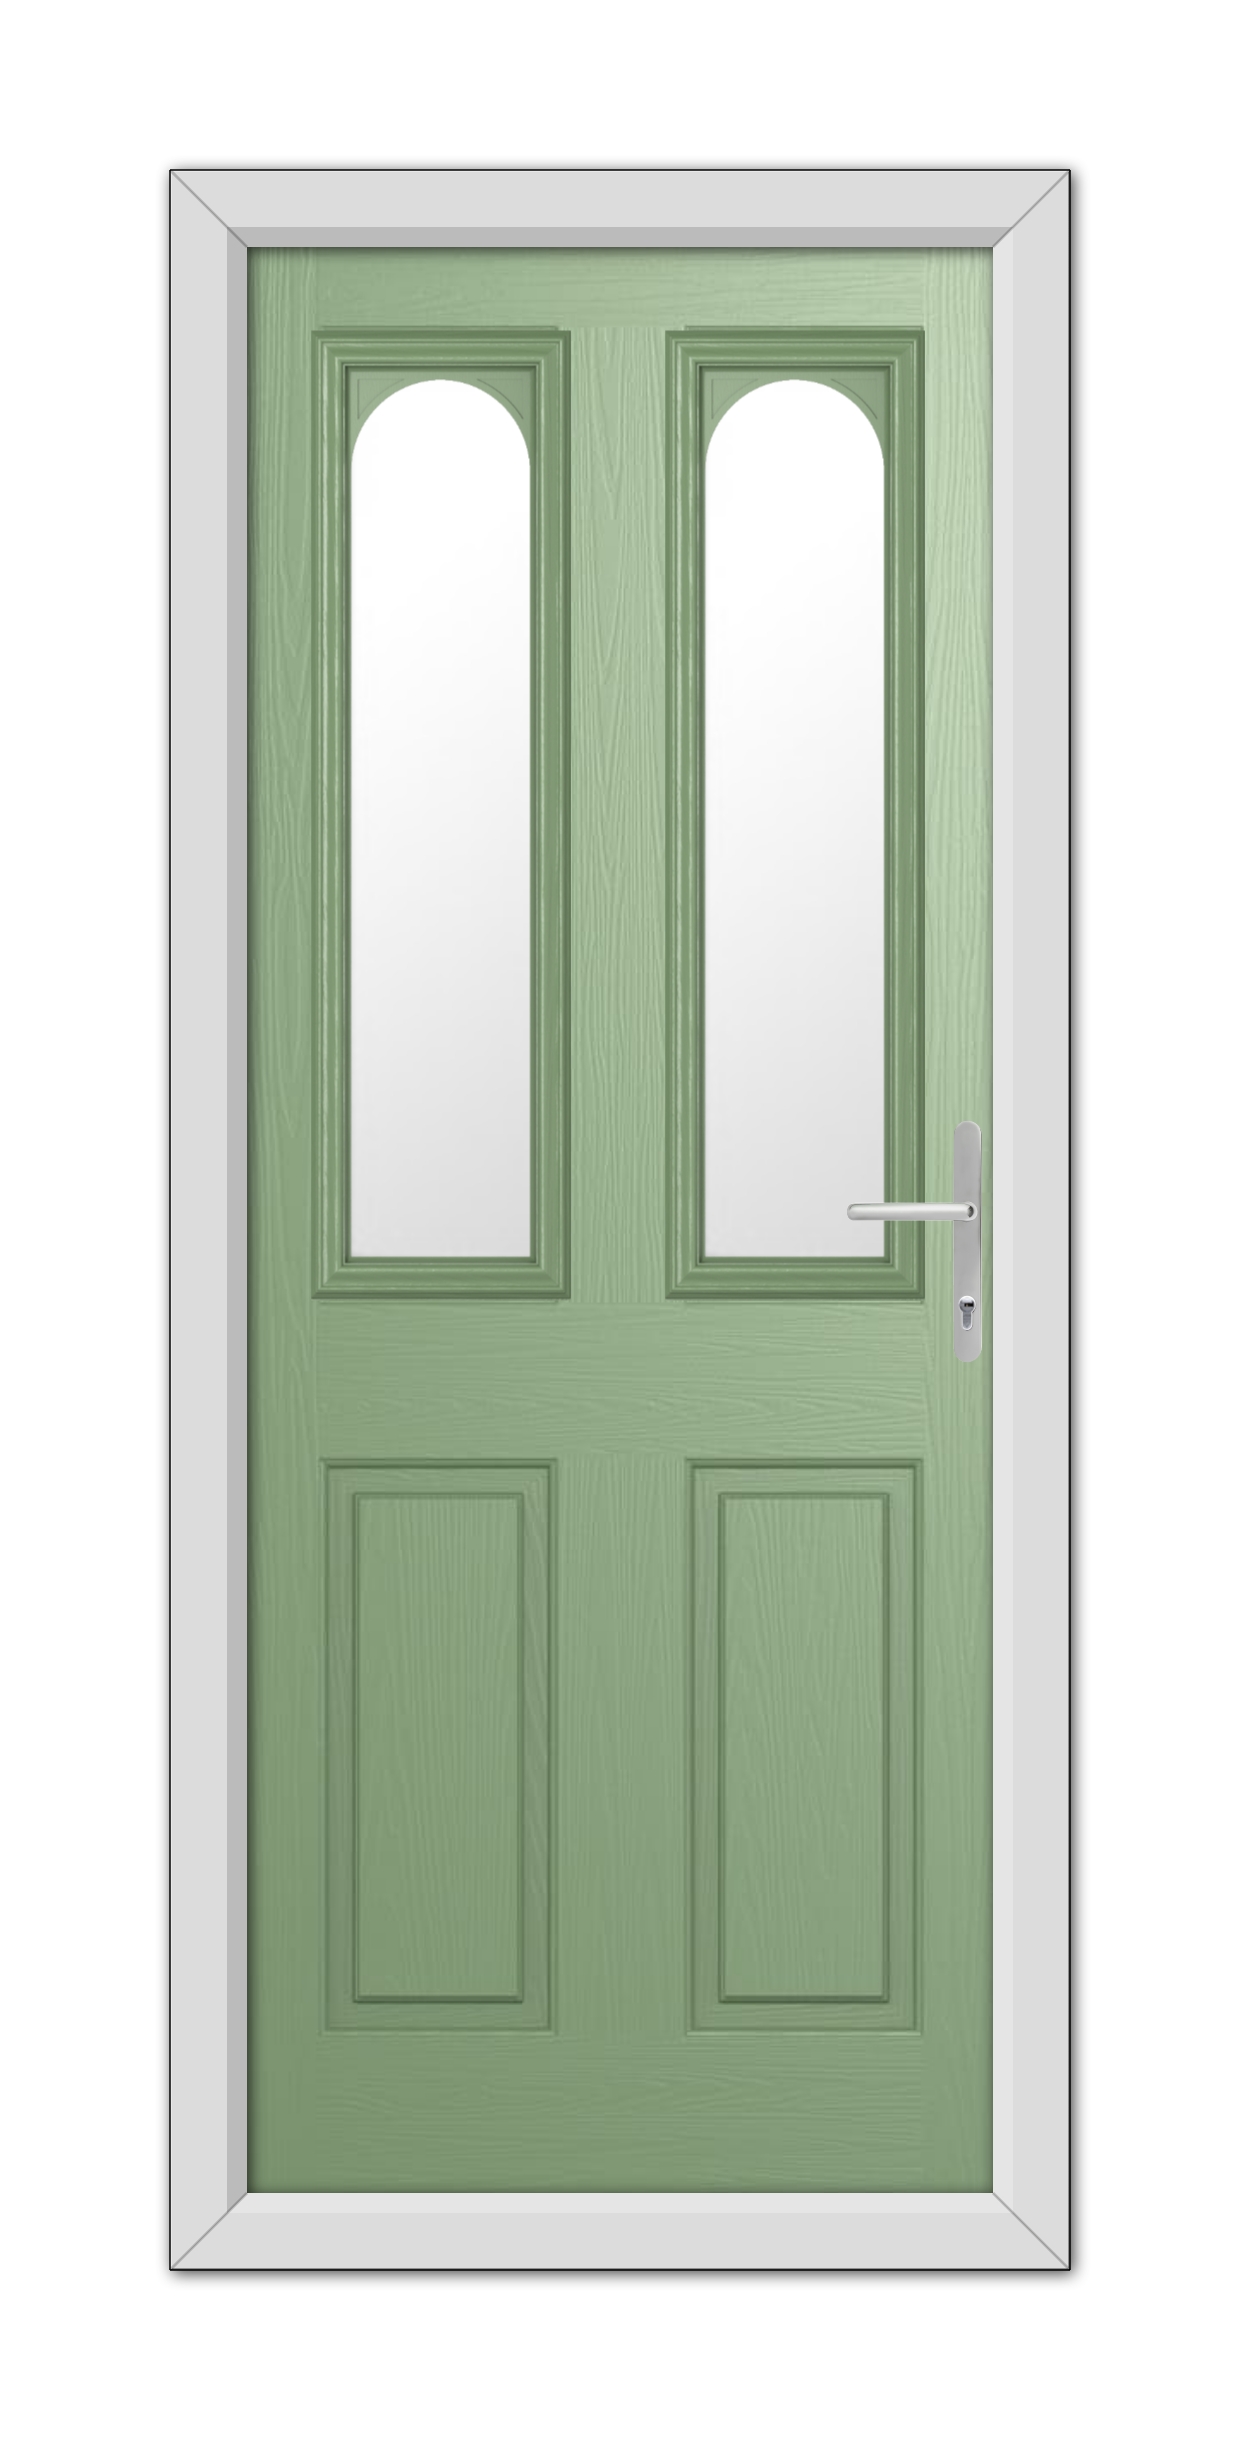 A Chartwell Green Elmhurst Composite Door 48mm Timber Core with window panels and a metallic handle, set within a white frame, isolated on a white background.